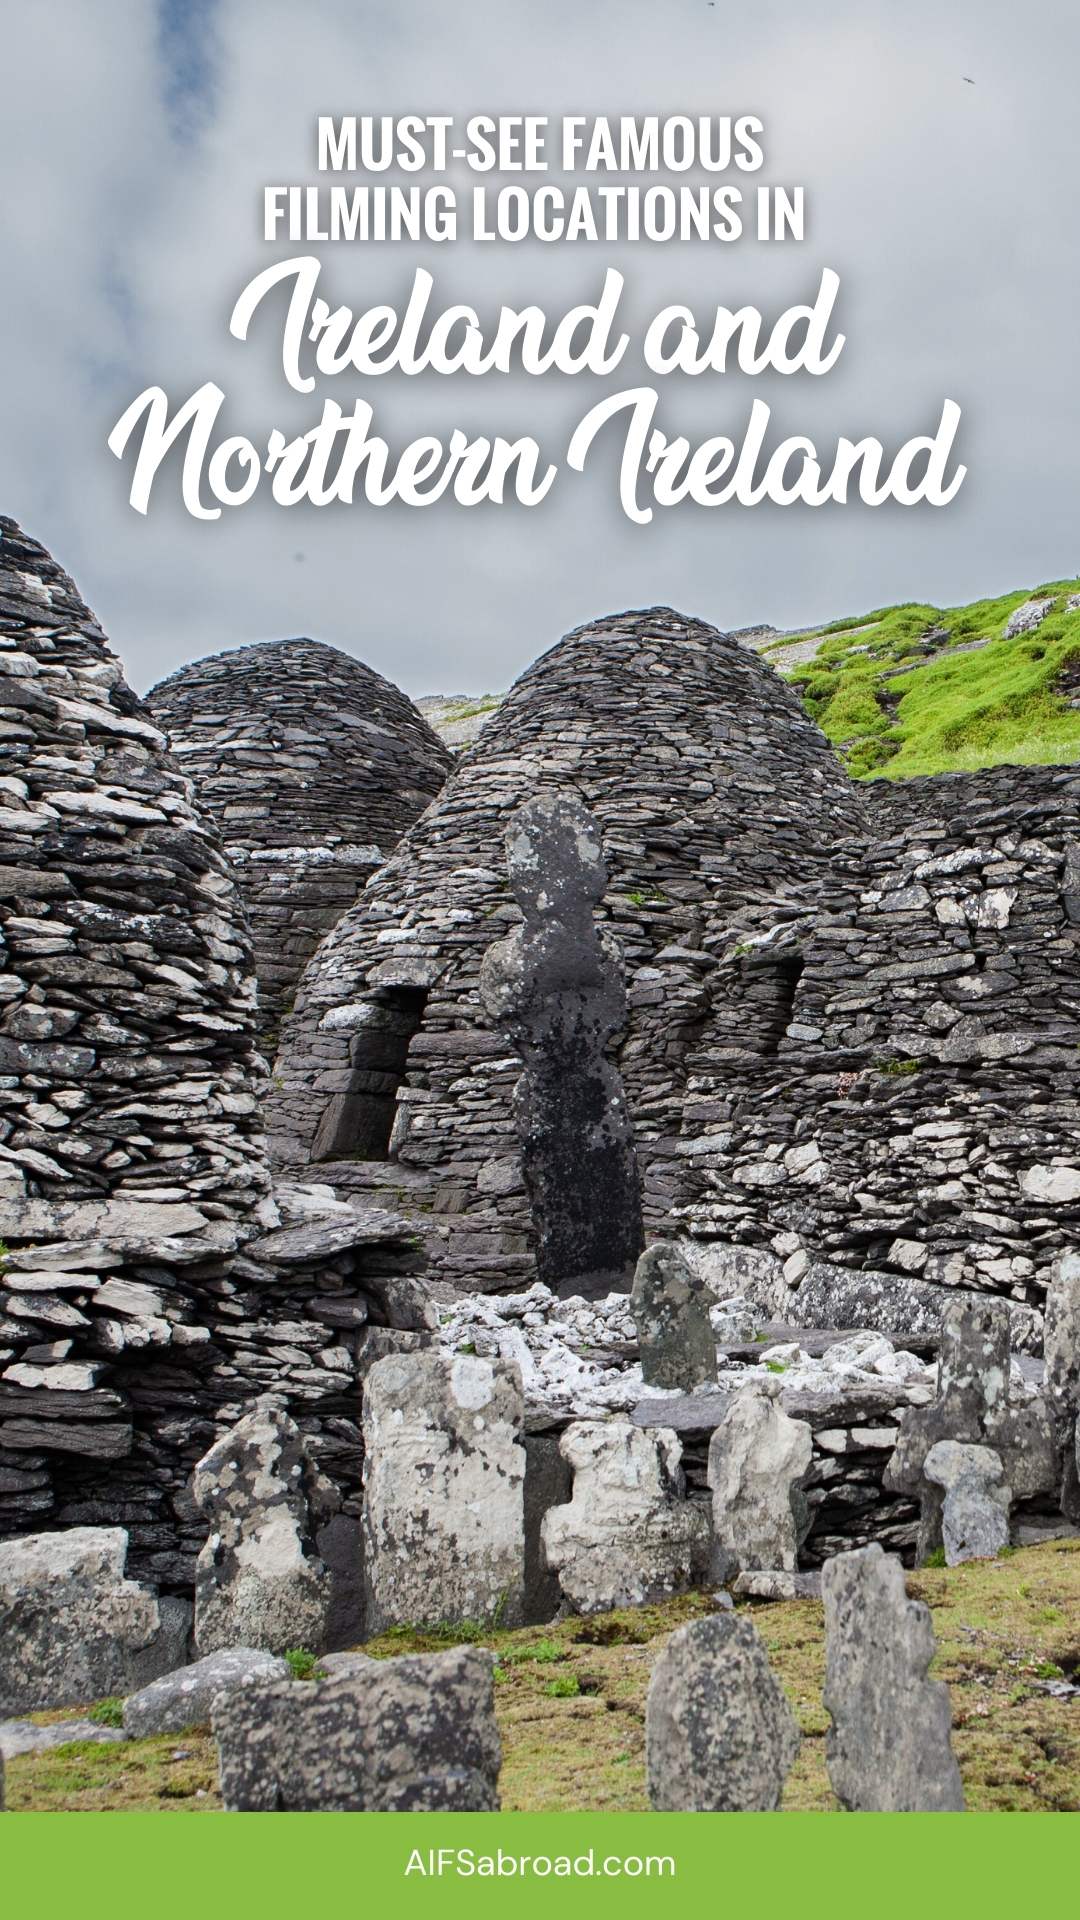 Pin image - Text saying "Must-See Famous Filming Locations in Ireland and Northern Ireland" over image of Skellig Michael - AIFS Abroad